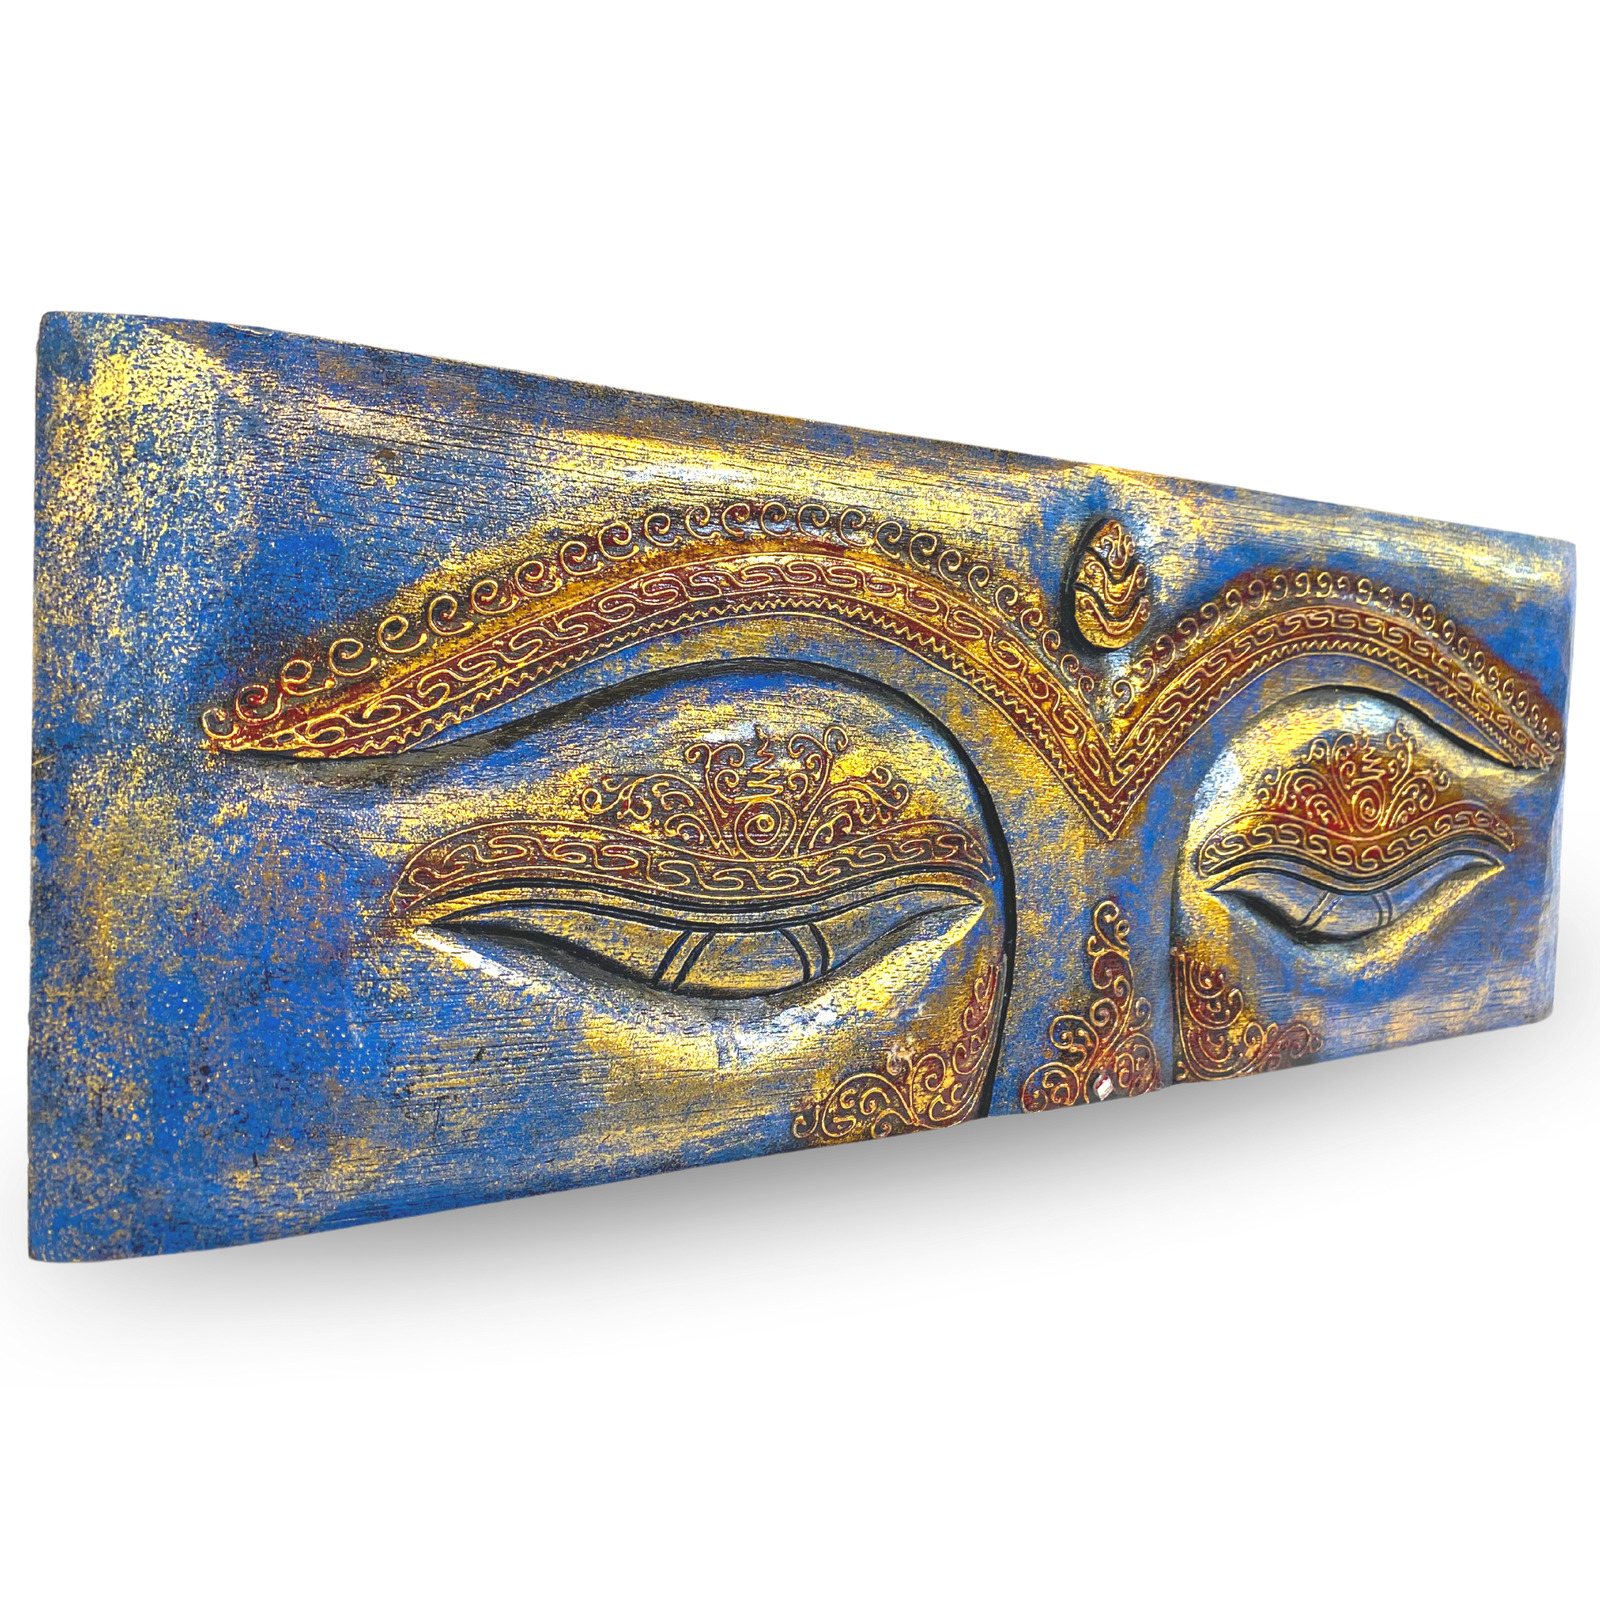 Wise Eyes of Buddha Wall art Panel Sculpture Hand Carved Wood Blue Bali art